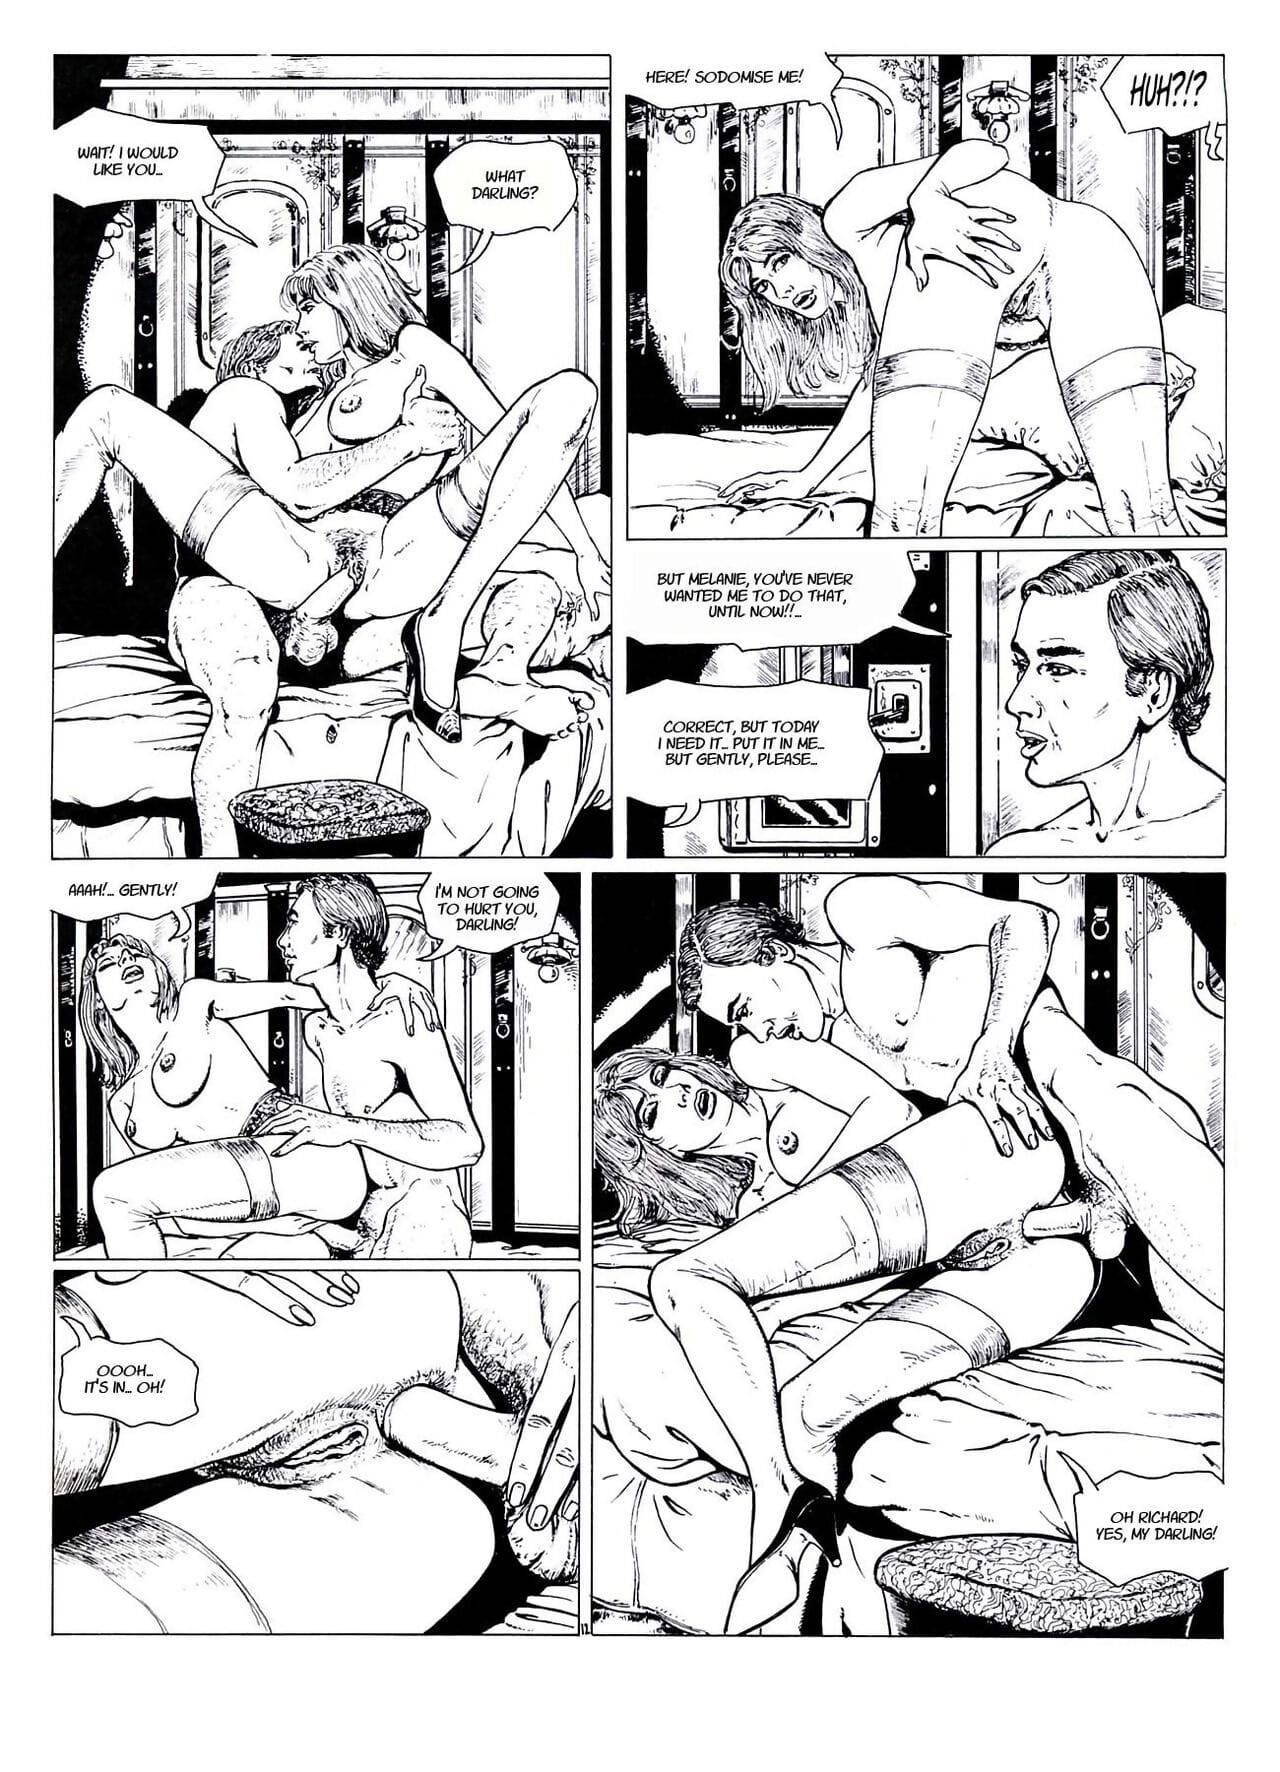 Ecstasy on the Orient Express page 1